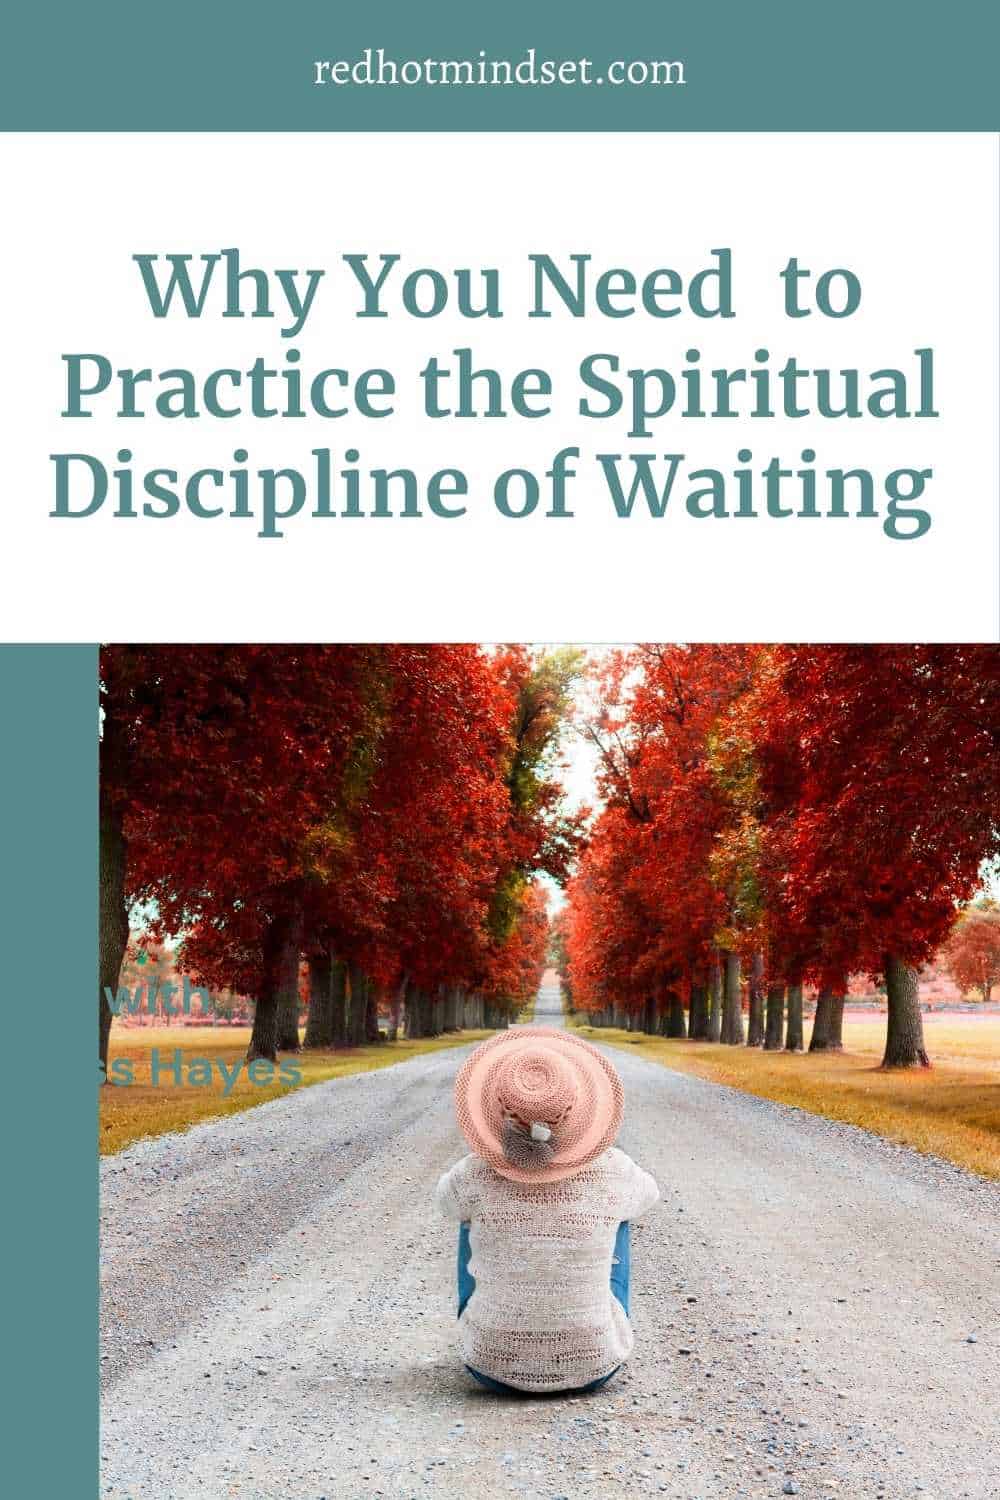 Ep 97 | Why The Spiritual Discipline of Waiting on God and Resting in Him is Necessary for Goal-Driven Women